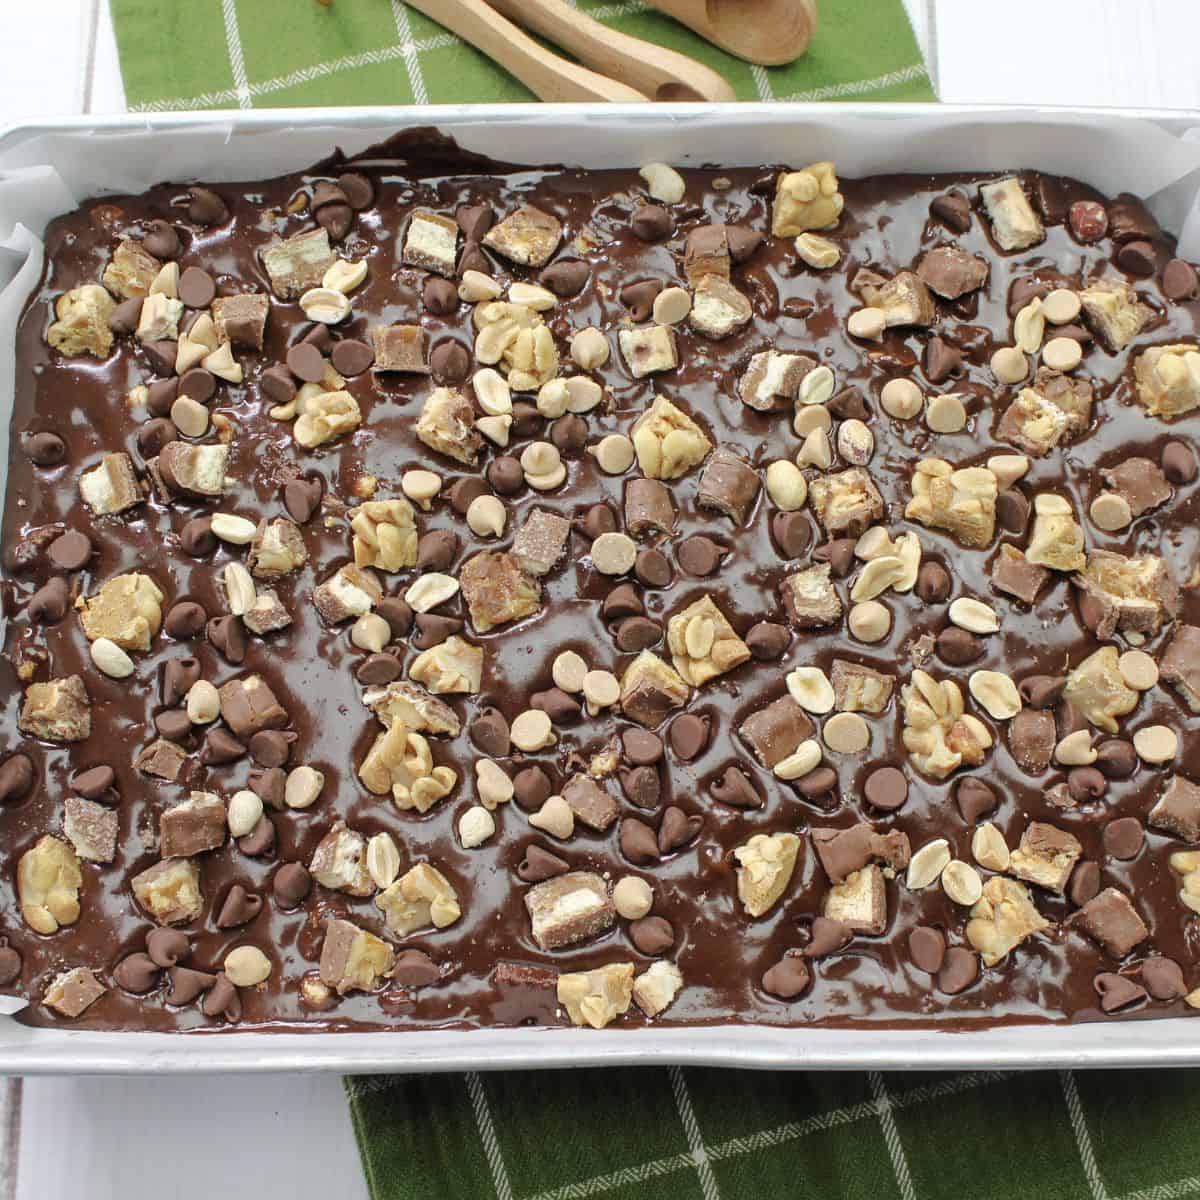 Steps to make candy bar brownies with candy pieces and chocolate in a brownie mix.